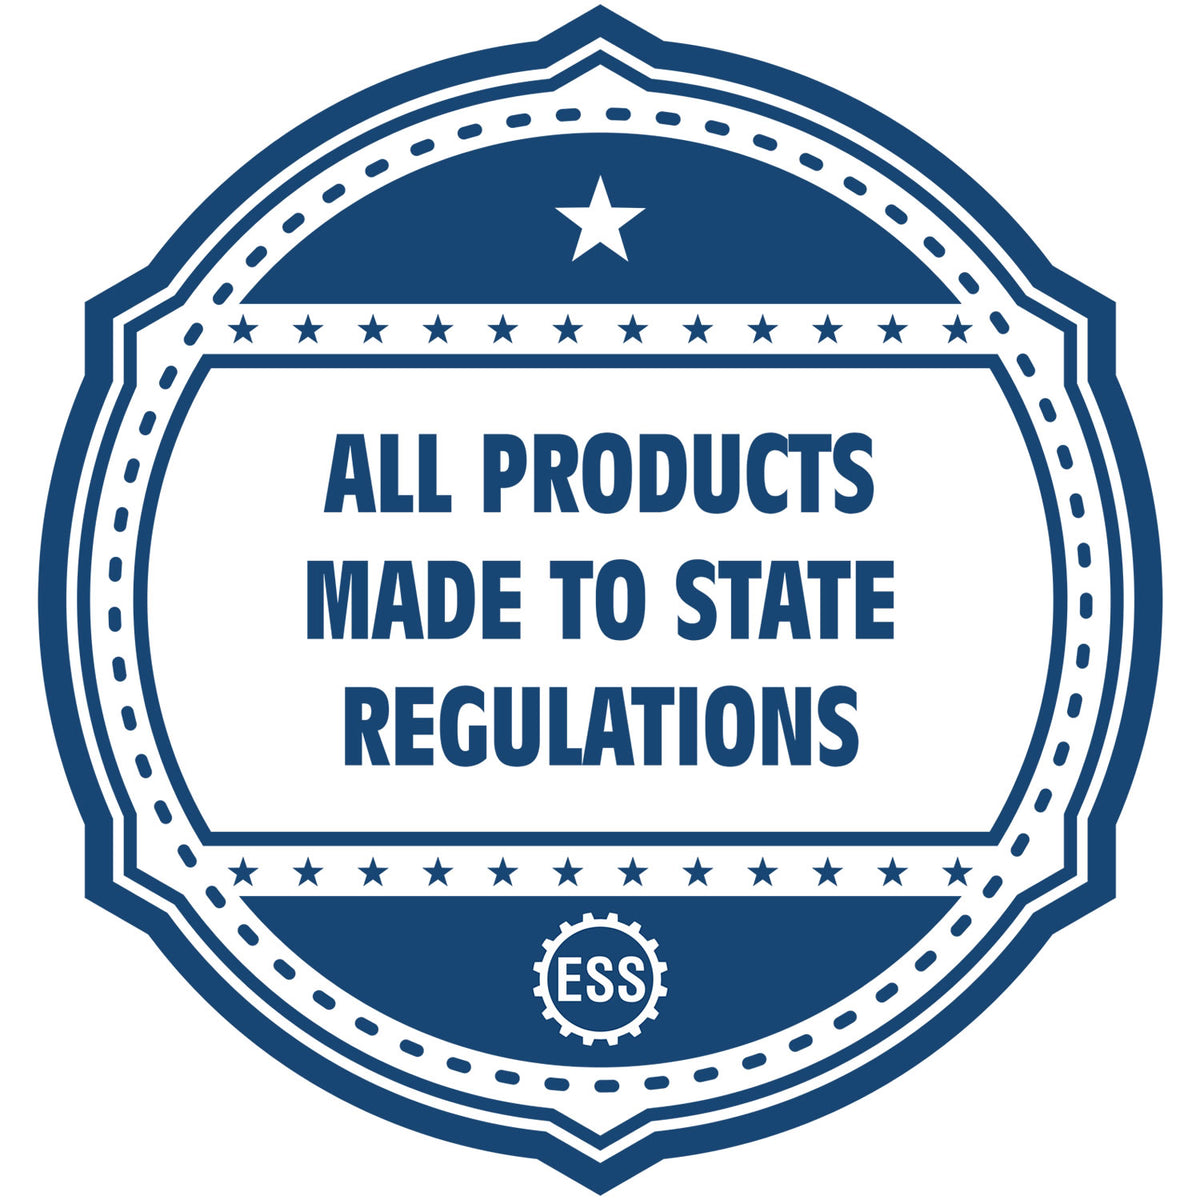 An icon or badge element for the Premium MaxLight Pre-Inked Maryland Landscape Architects Stamp showing that this product is made in compliance with state regulations.